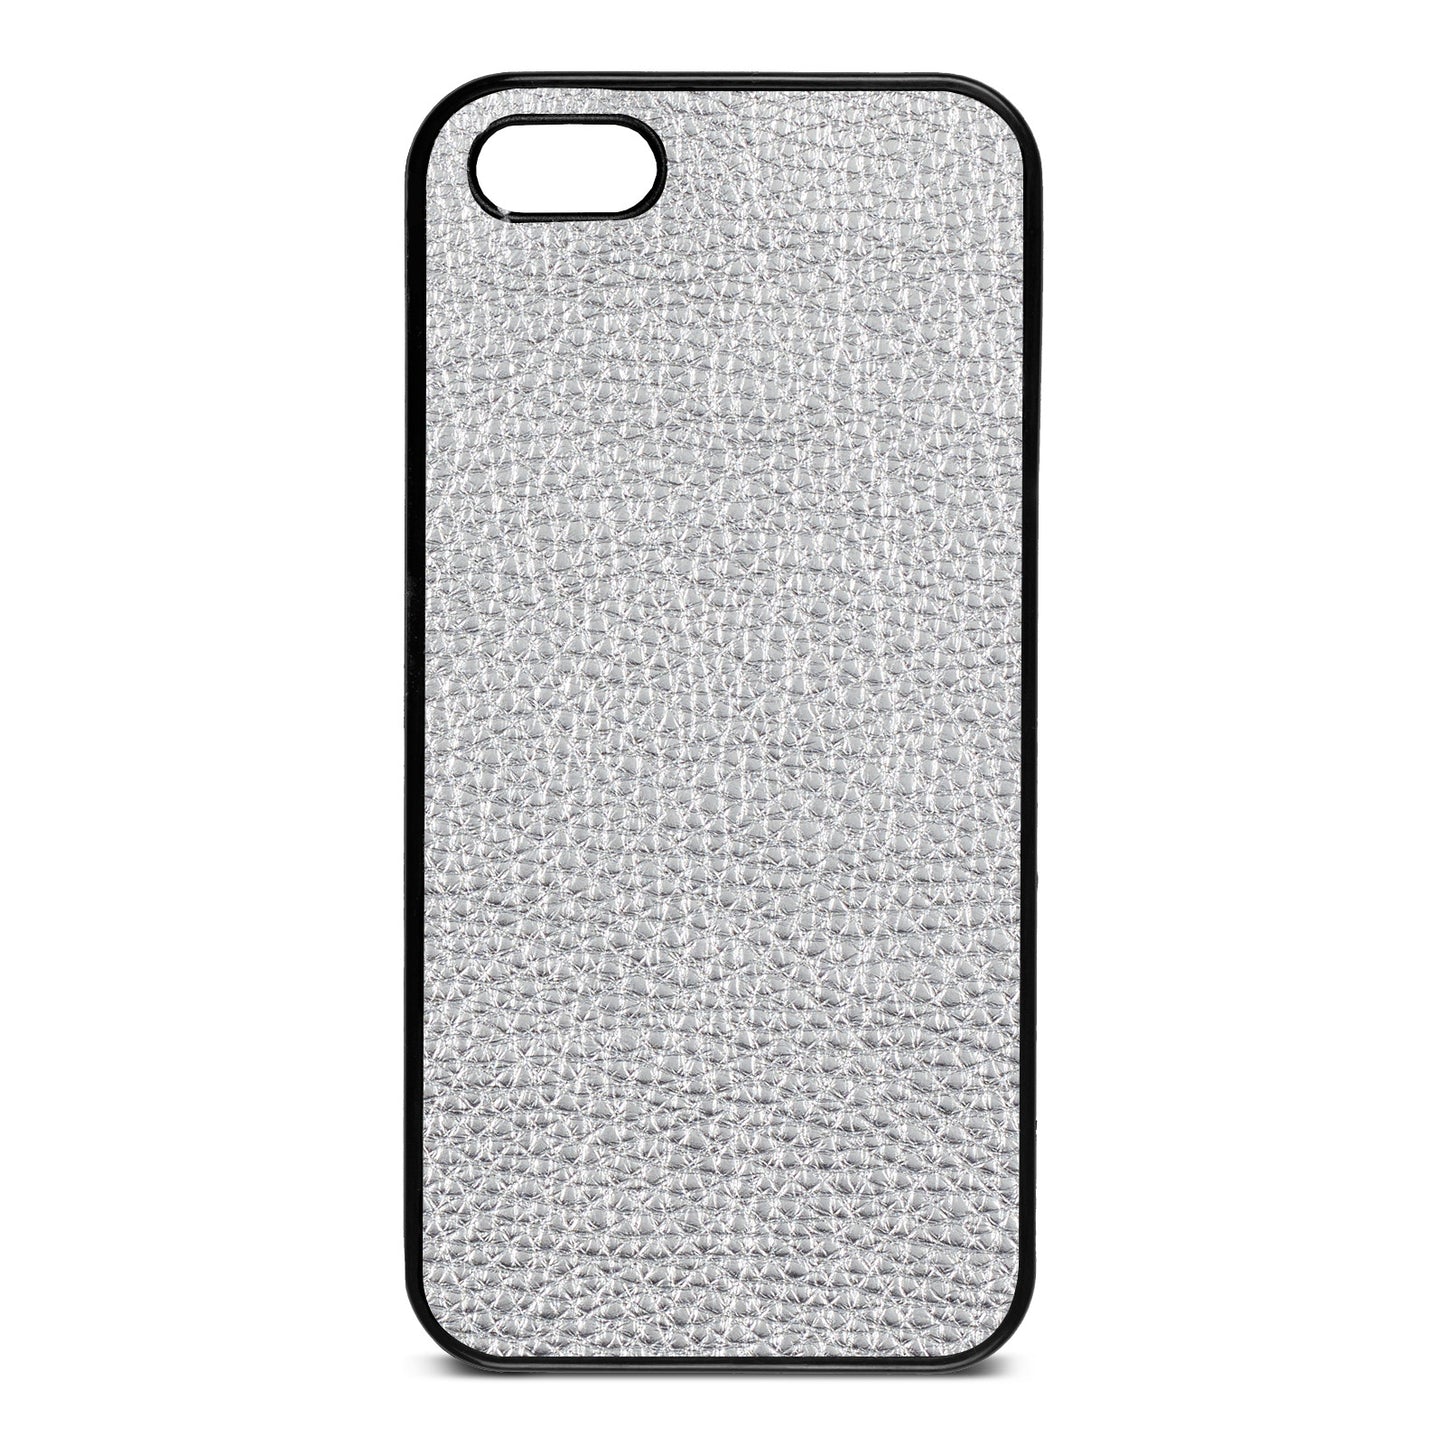 Blank iPhone 5 Silver Pebble Leather Case